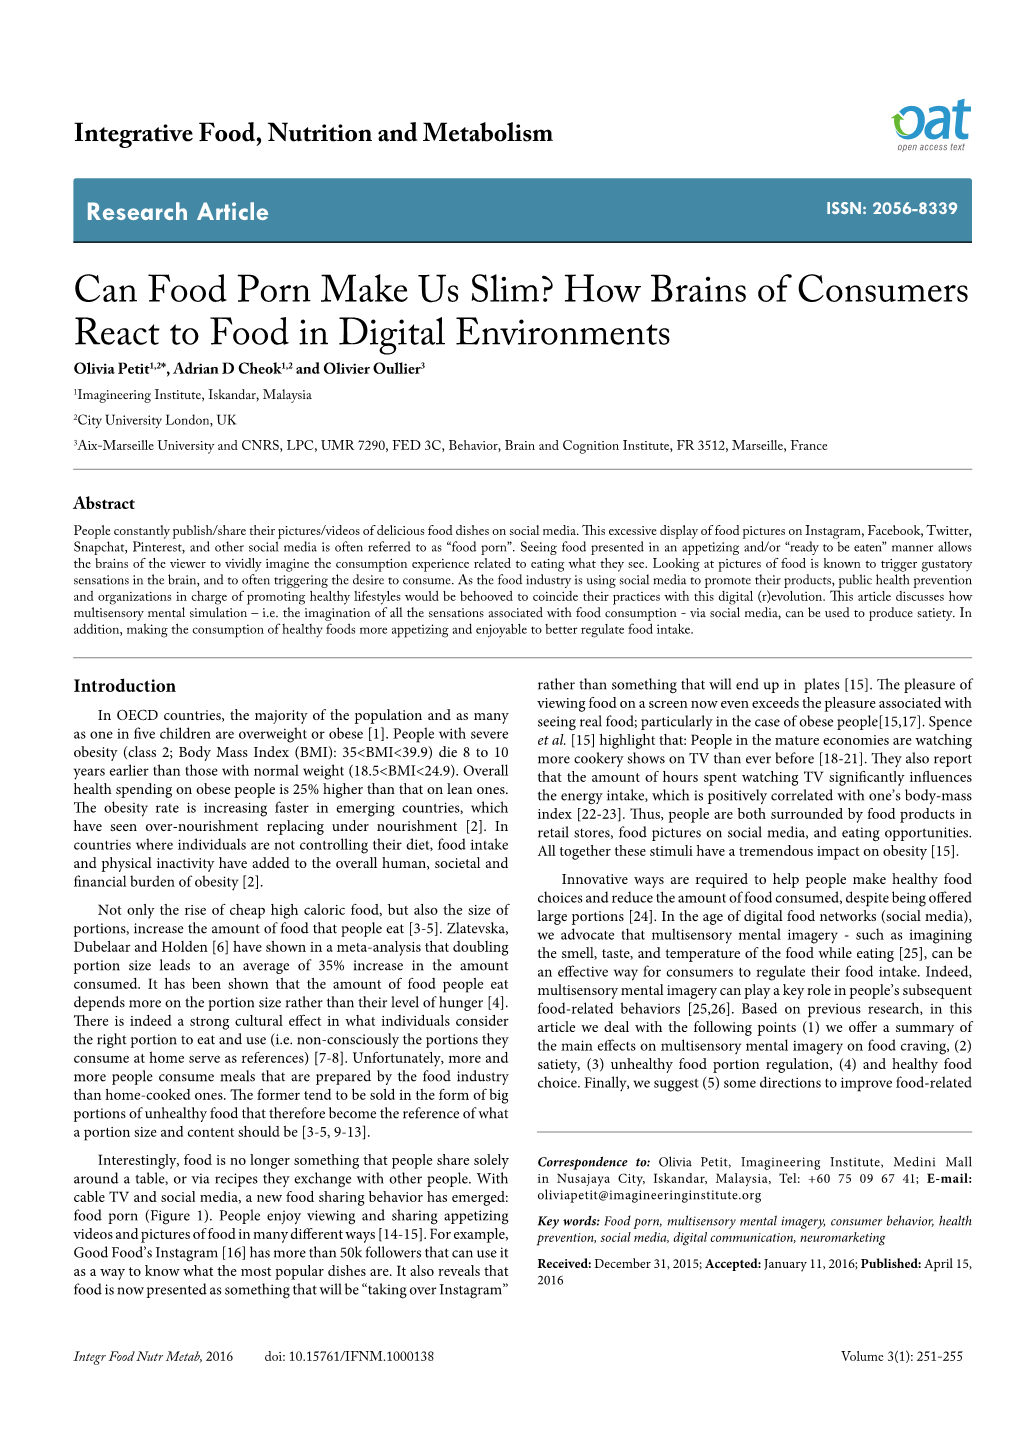 How Brains of Consumers React to Food in Digital Environments